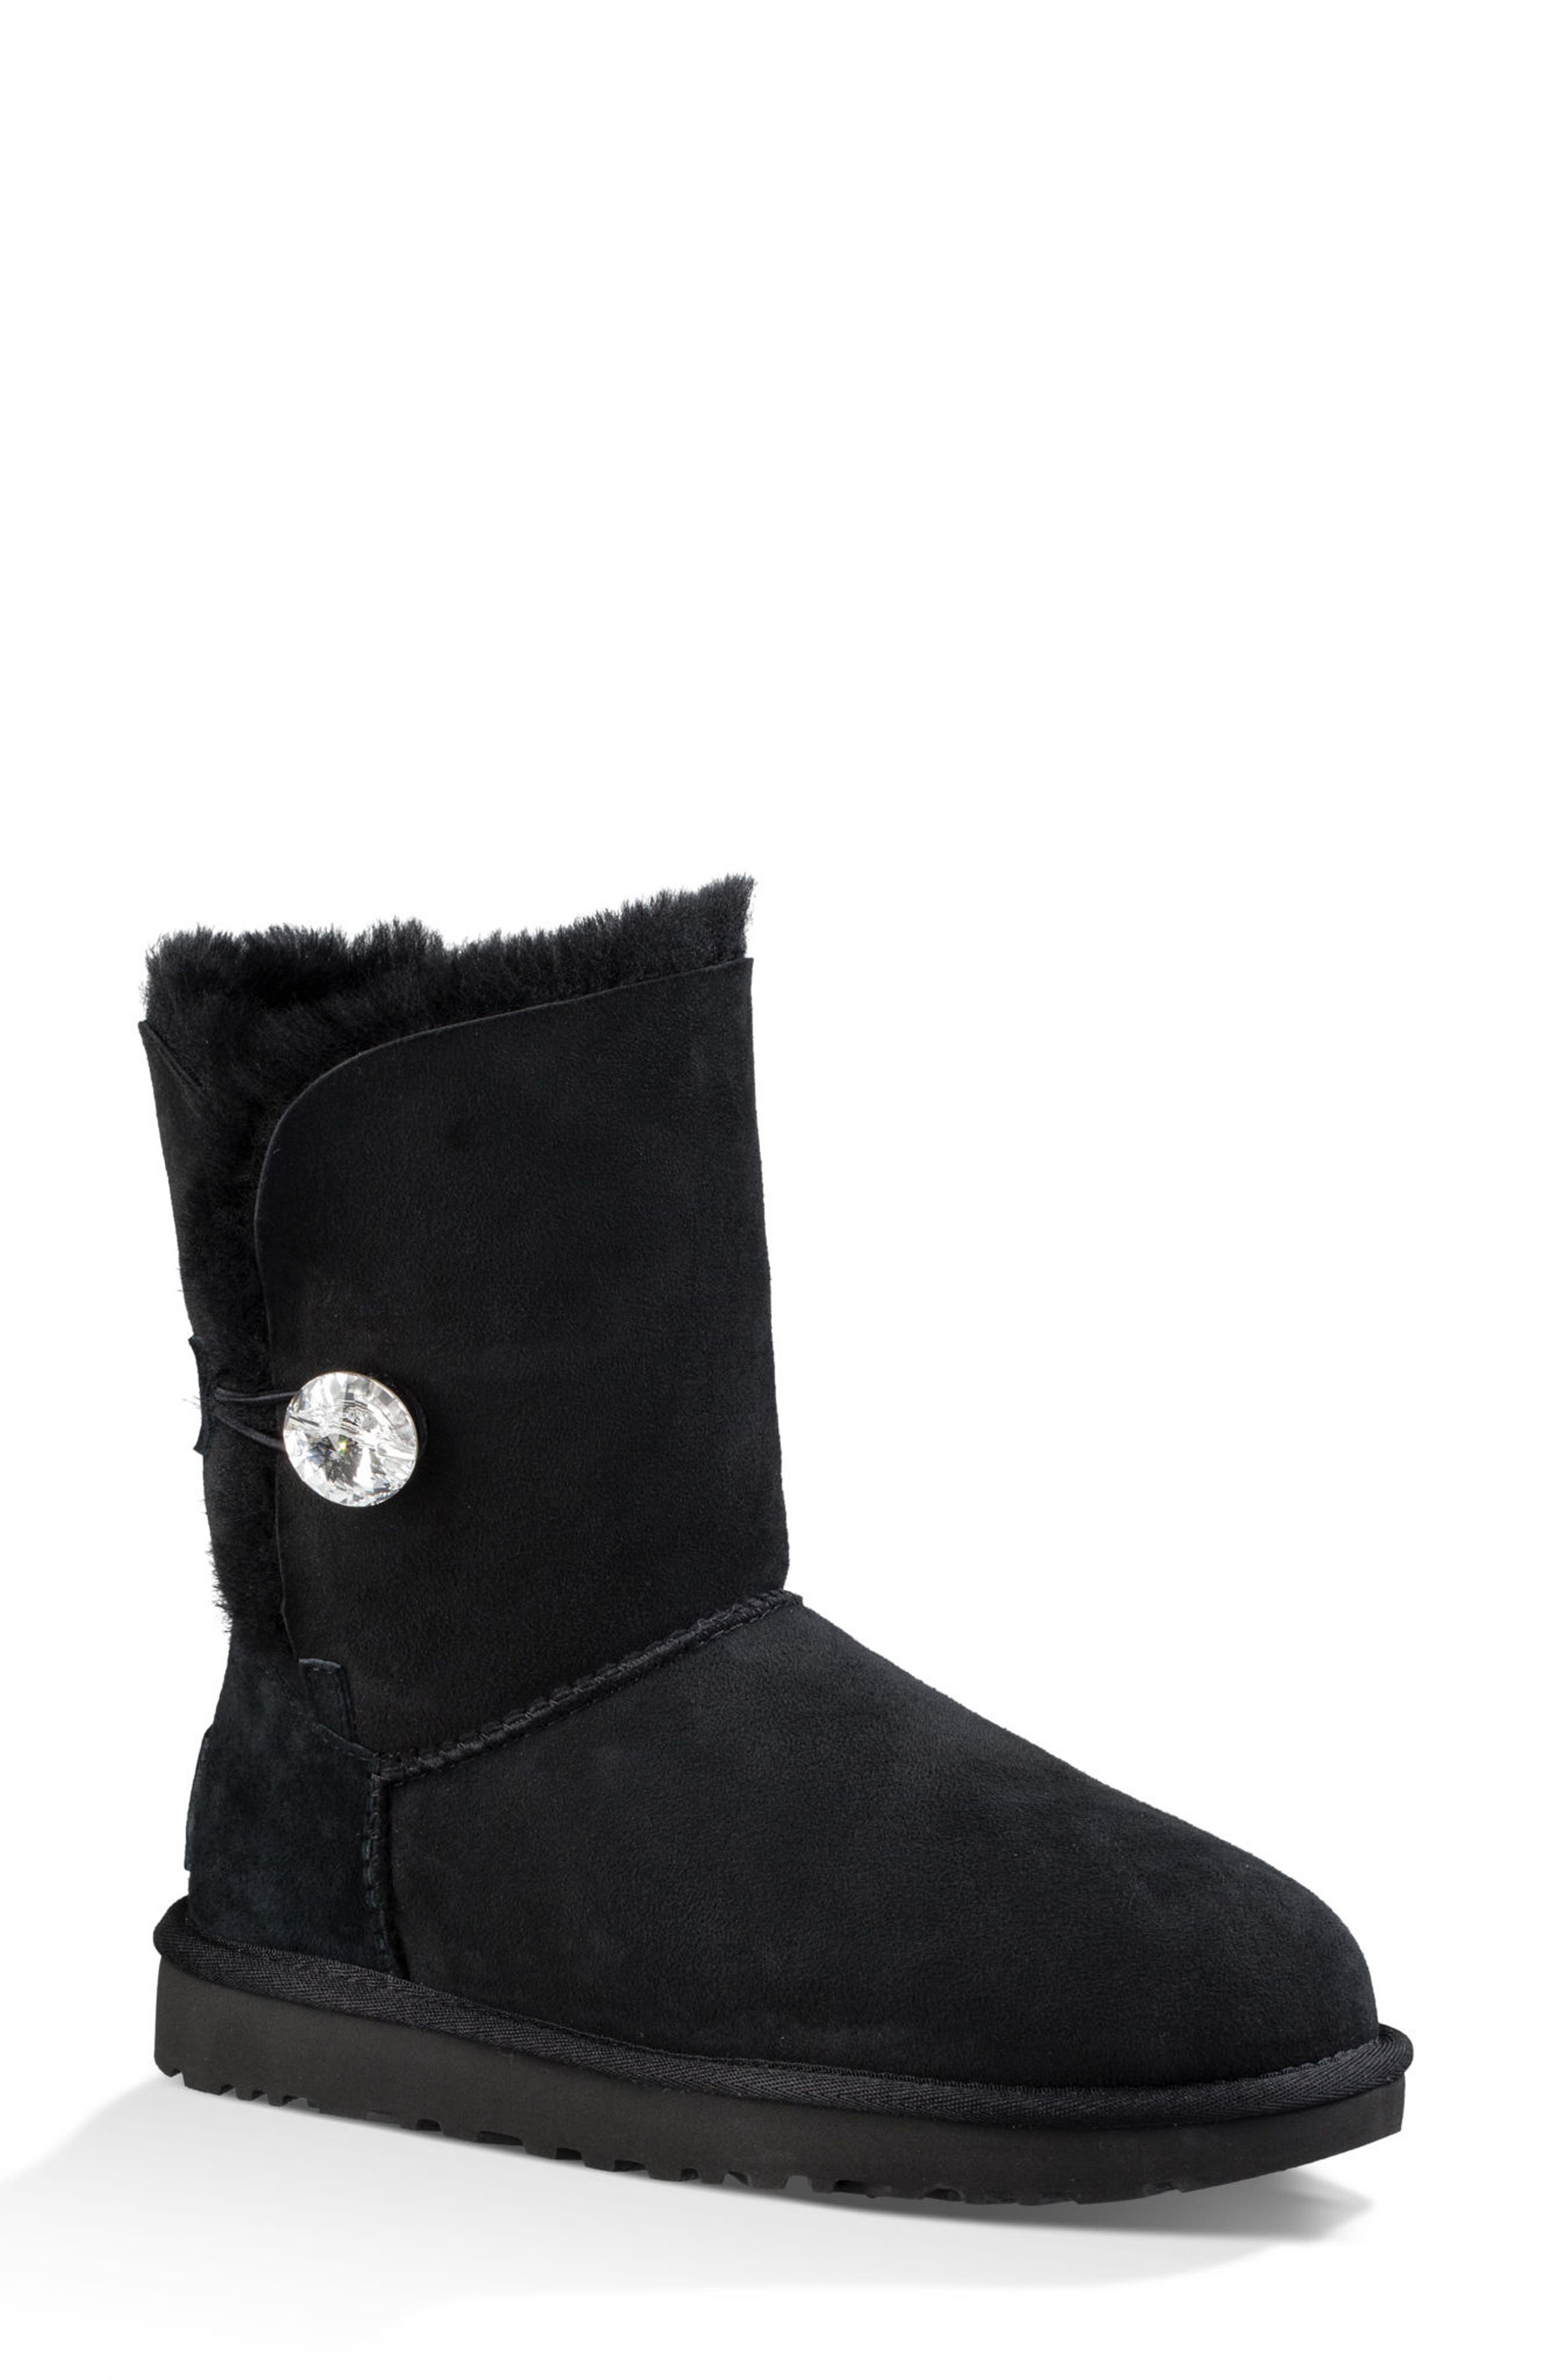 nordstrom boots uggs